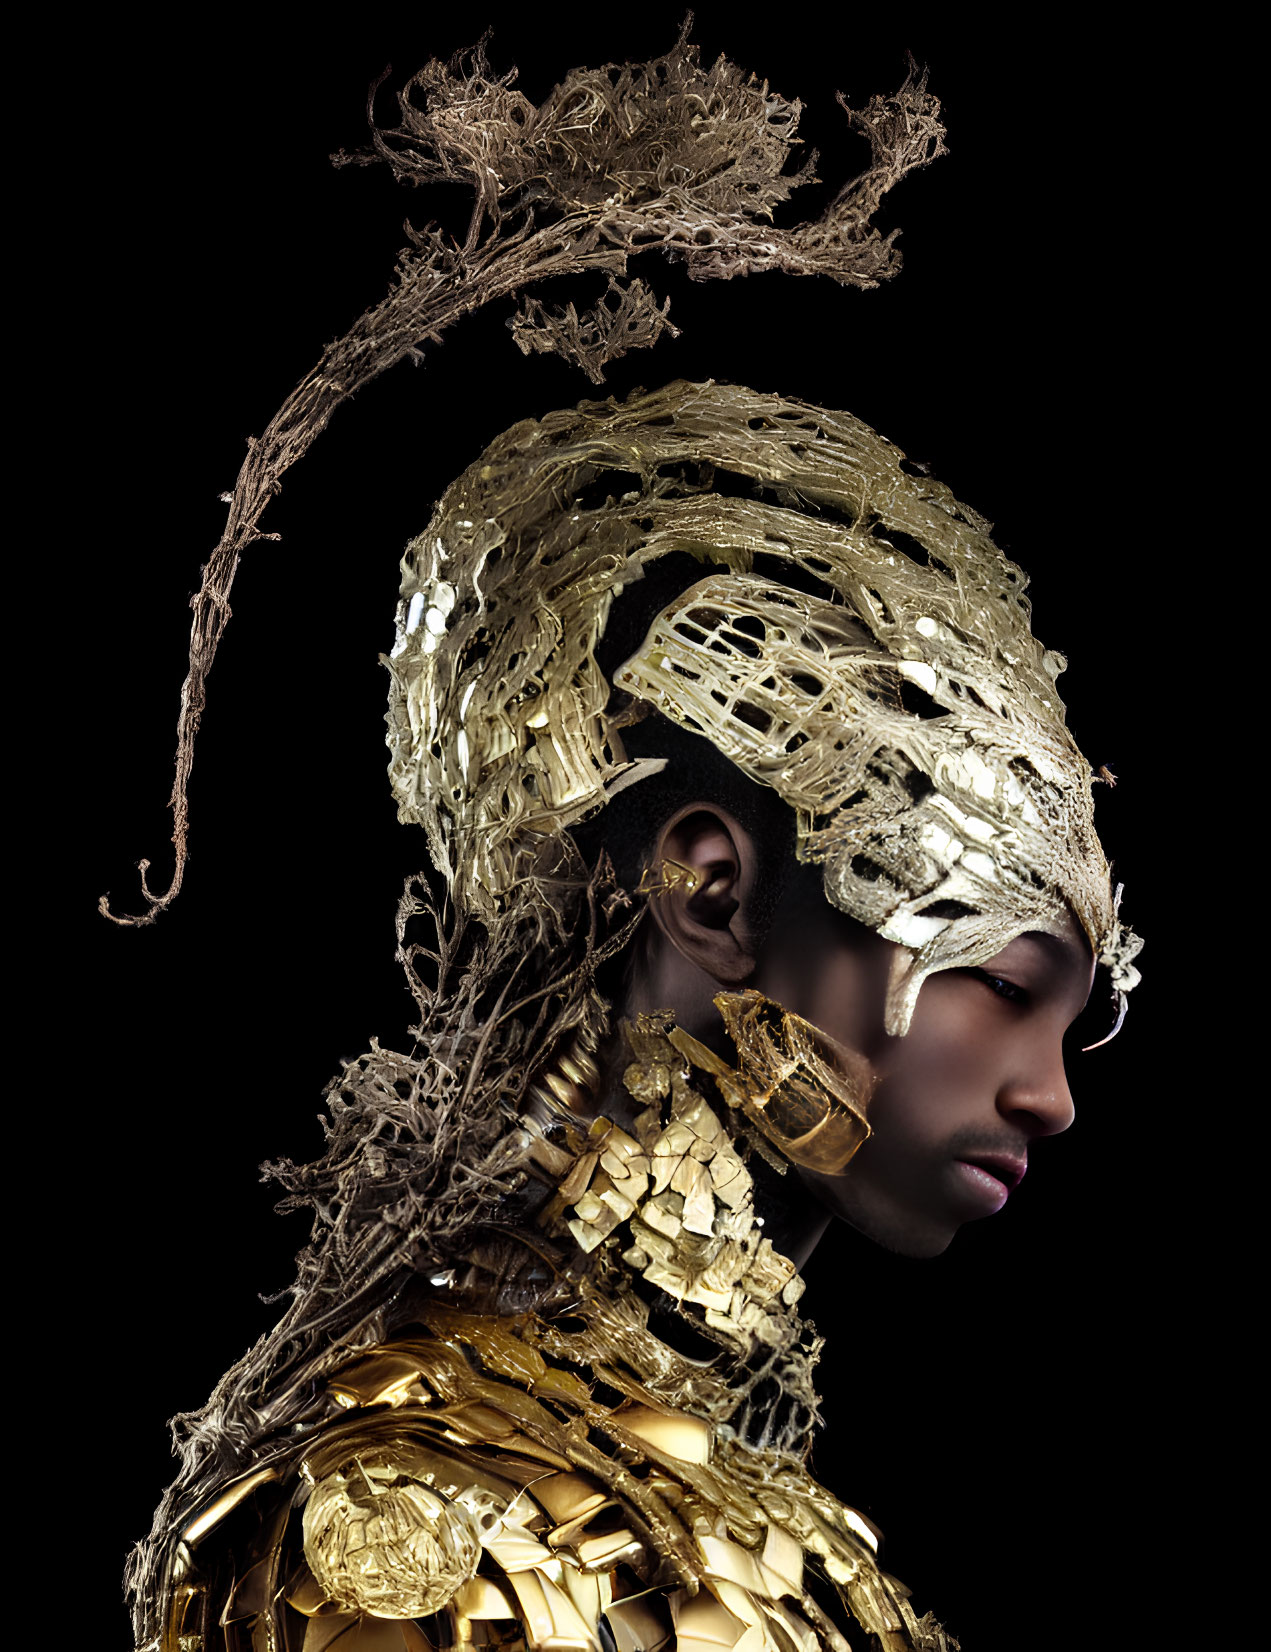 Dark-skinned person in ornate golden headpiece and armor on black background